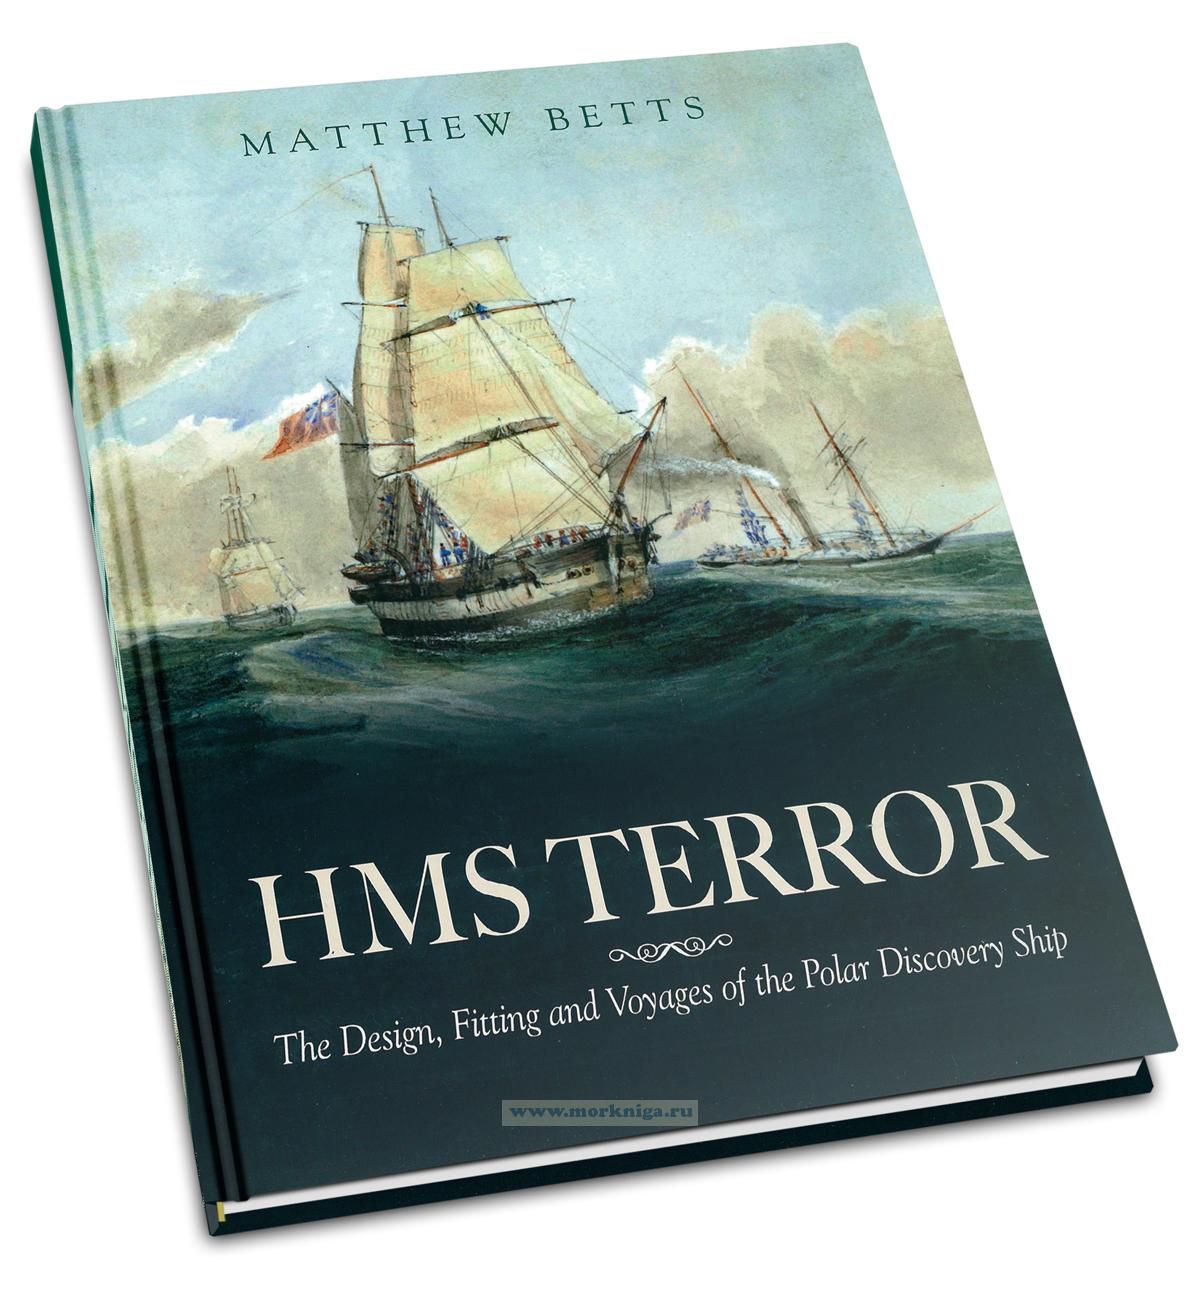 HMS Terror. The Design, Fitting and Voyages of a Polar Discovery Ship